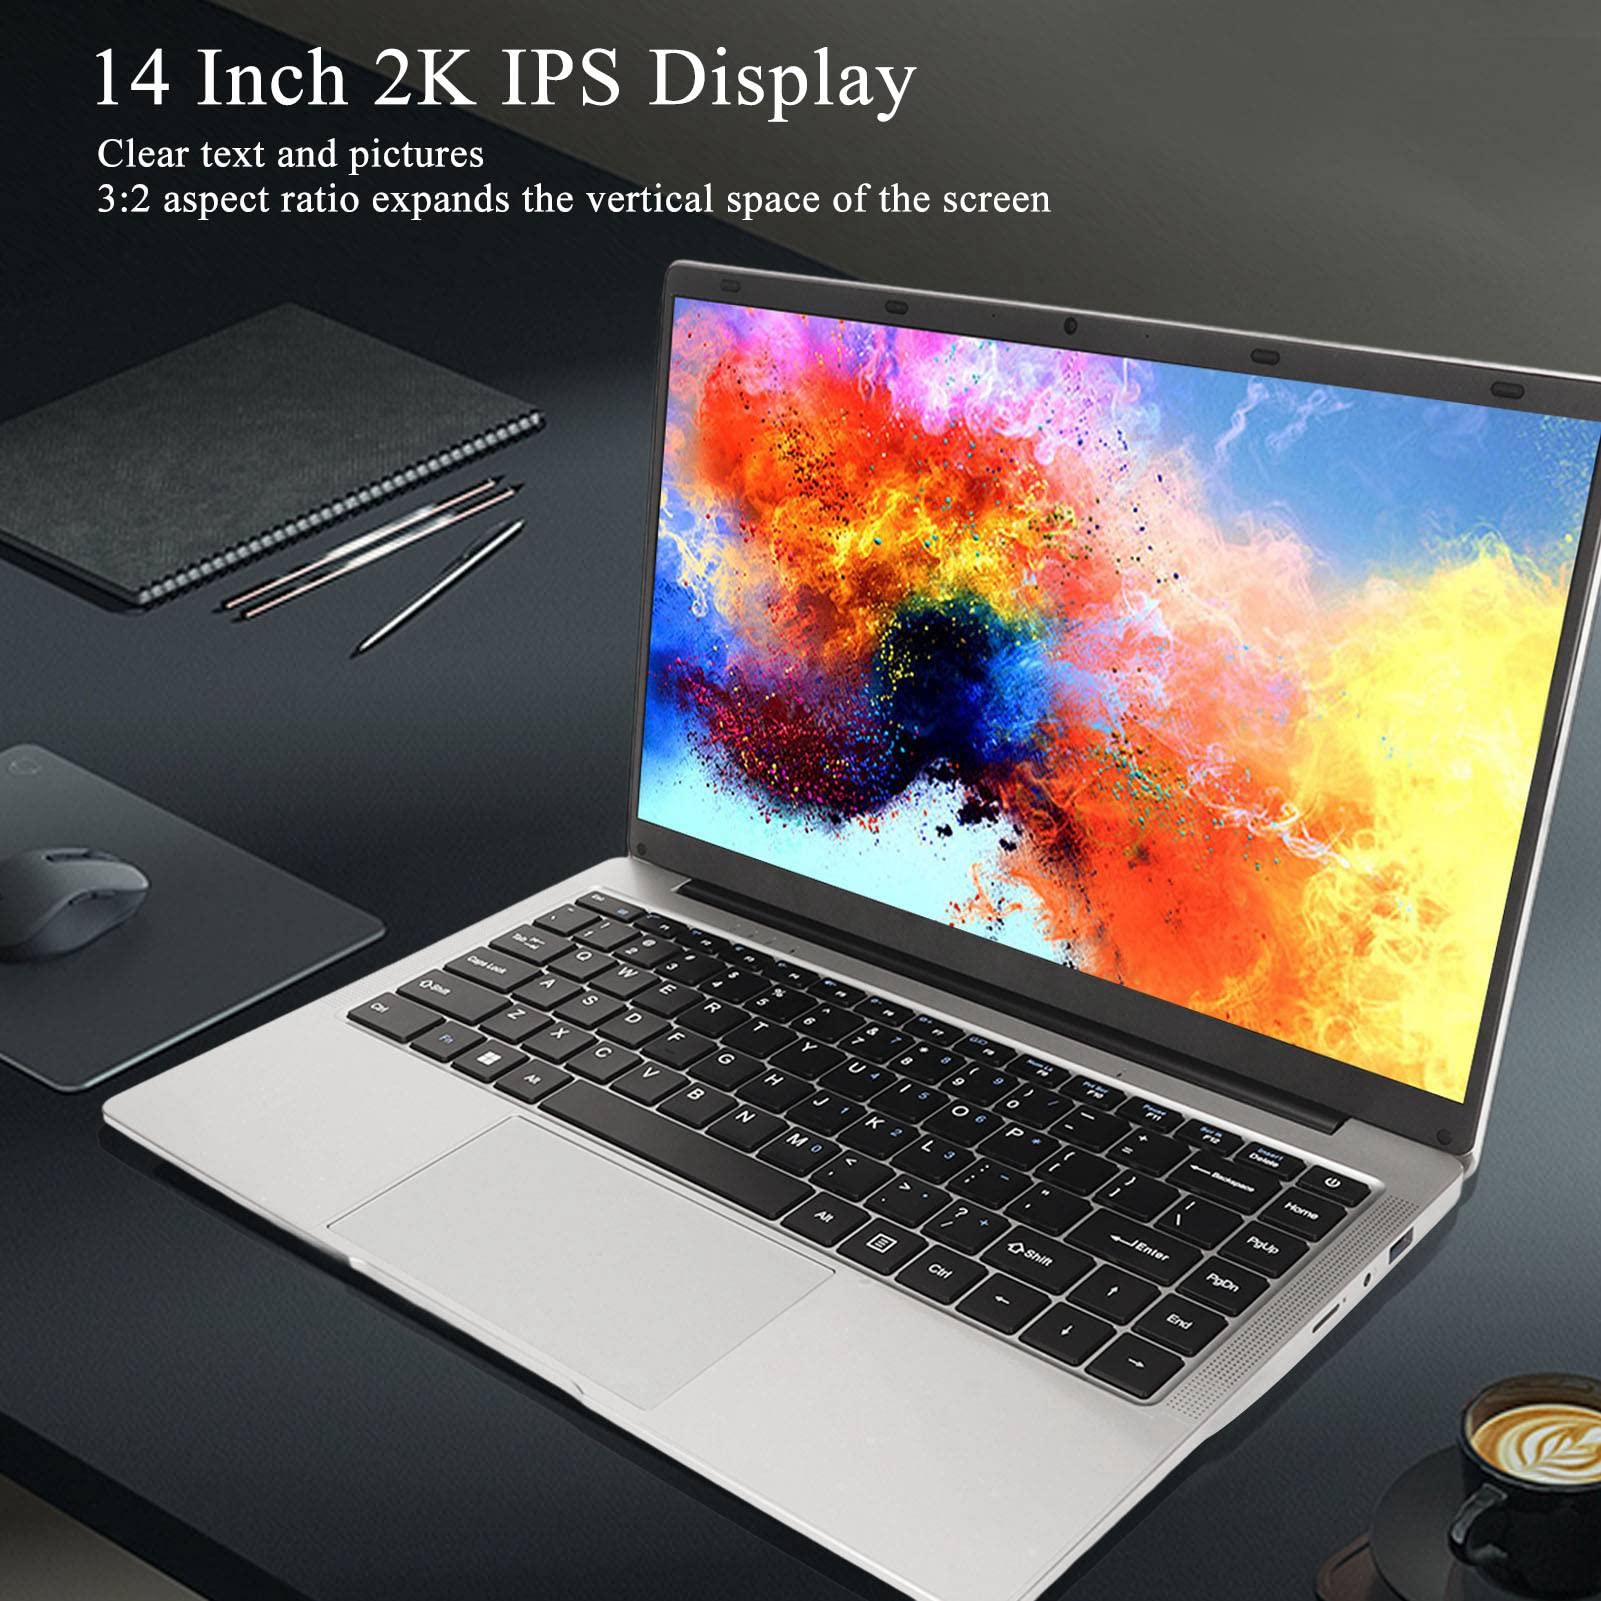 Acogedor 14 Inch 2K Resolution IPS Display Laptop, 6GB RAM and 512GB SSD, Built in Dual Stereo Speakers, High Performance Microphone, Notebook PC for Windows 11